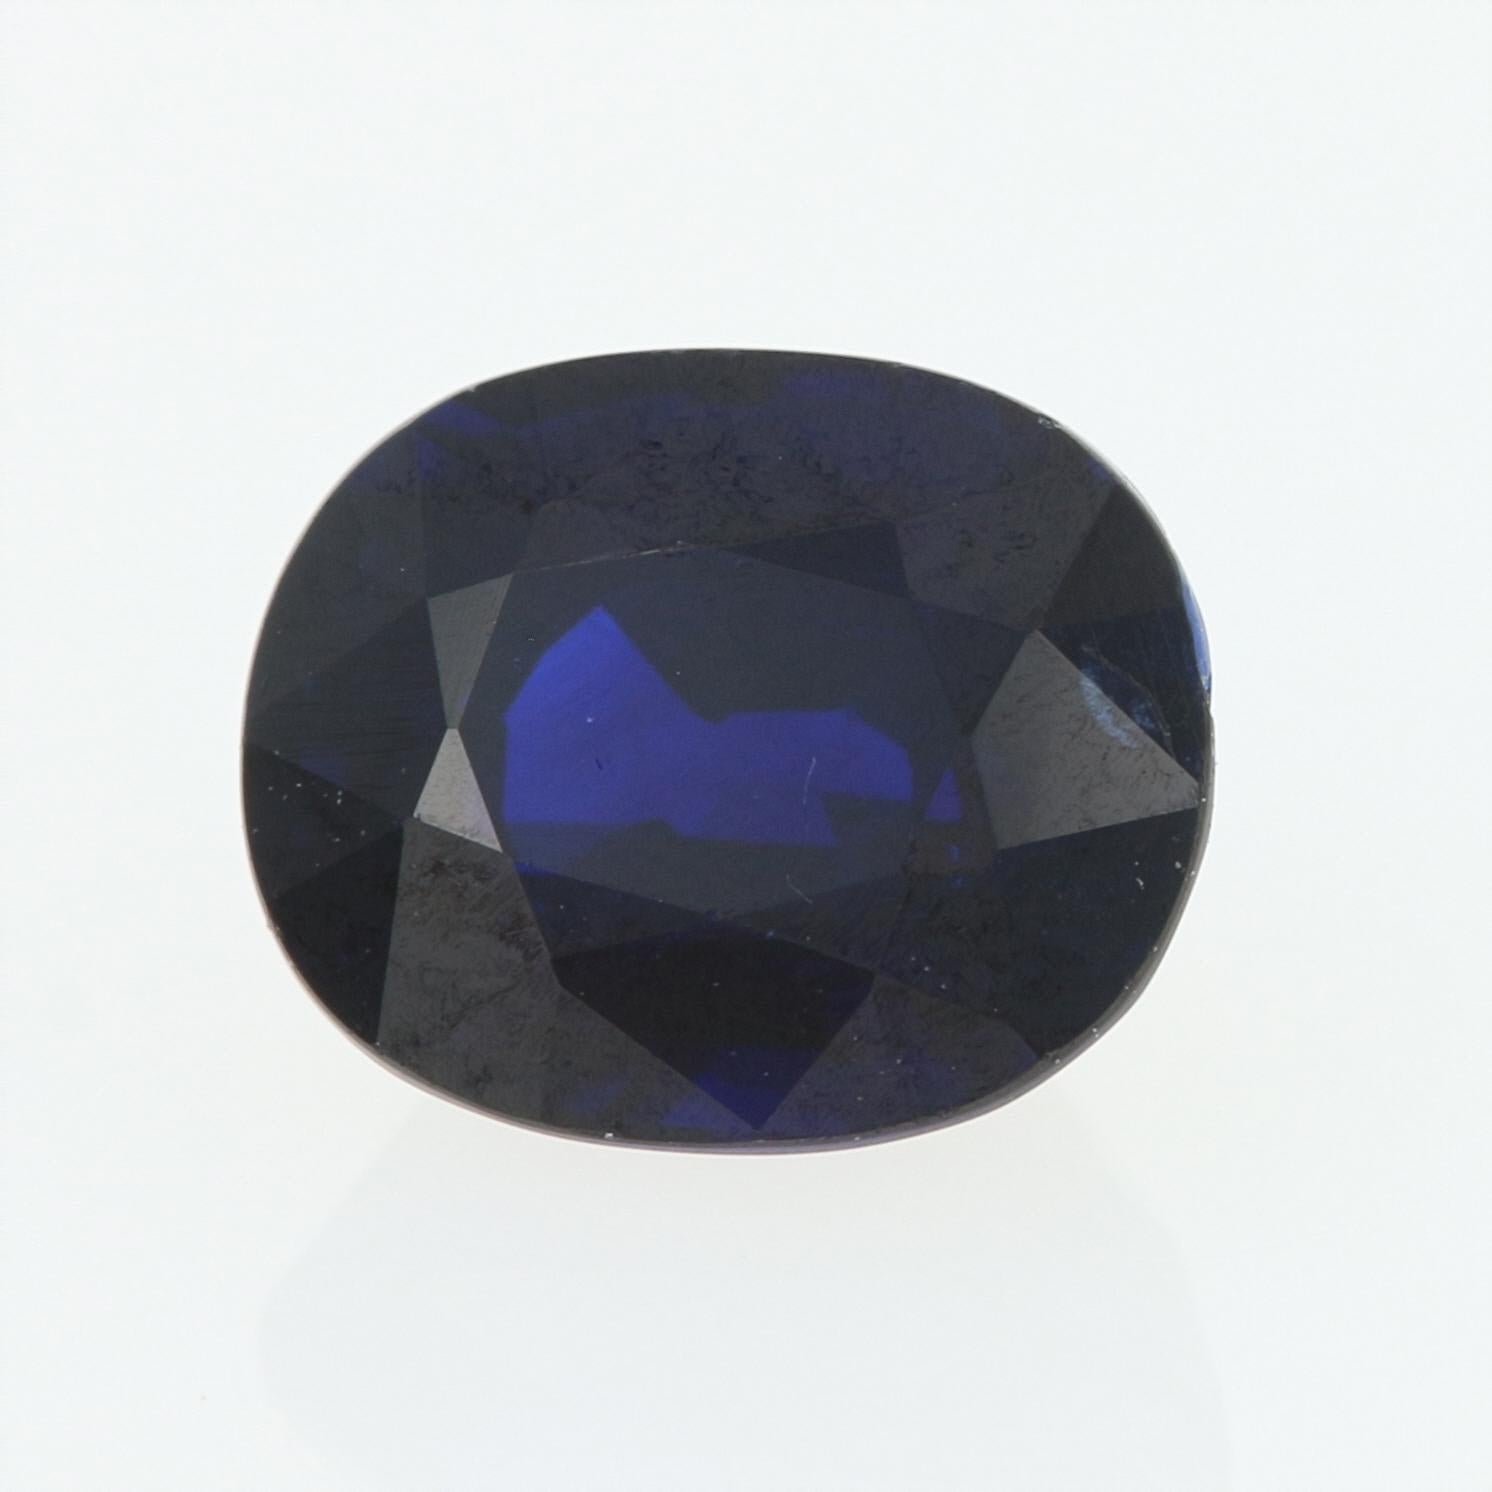 Shape/Cut: Oval 
Color: Blue
Dimensions (mm): 6.27mm x 5.15mm
Weight: 1.15ct

Treatment: Heating 
 
Please check out the enlarged pictures.

Thank you for taking the time to read our description. If you have any questions, please do not hesitate to